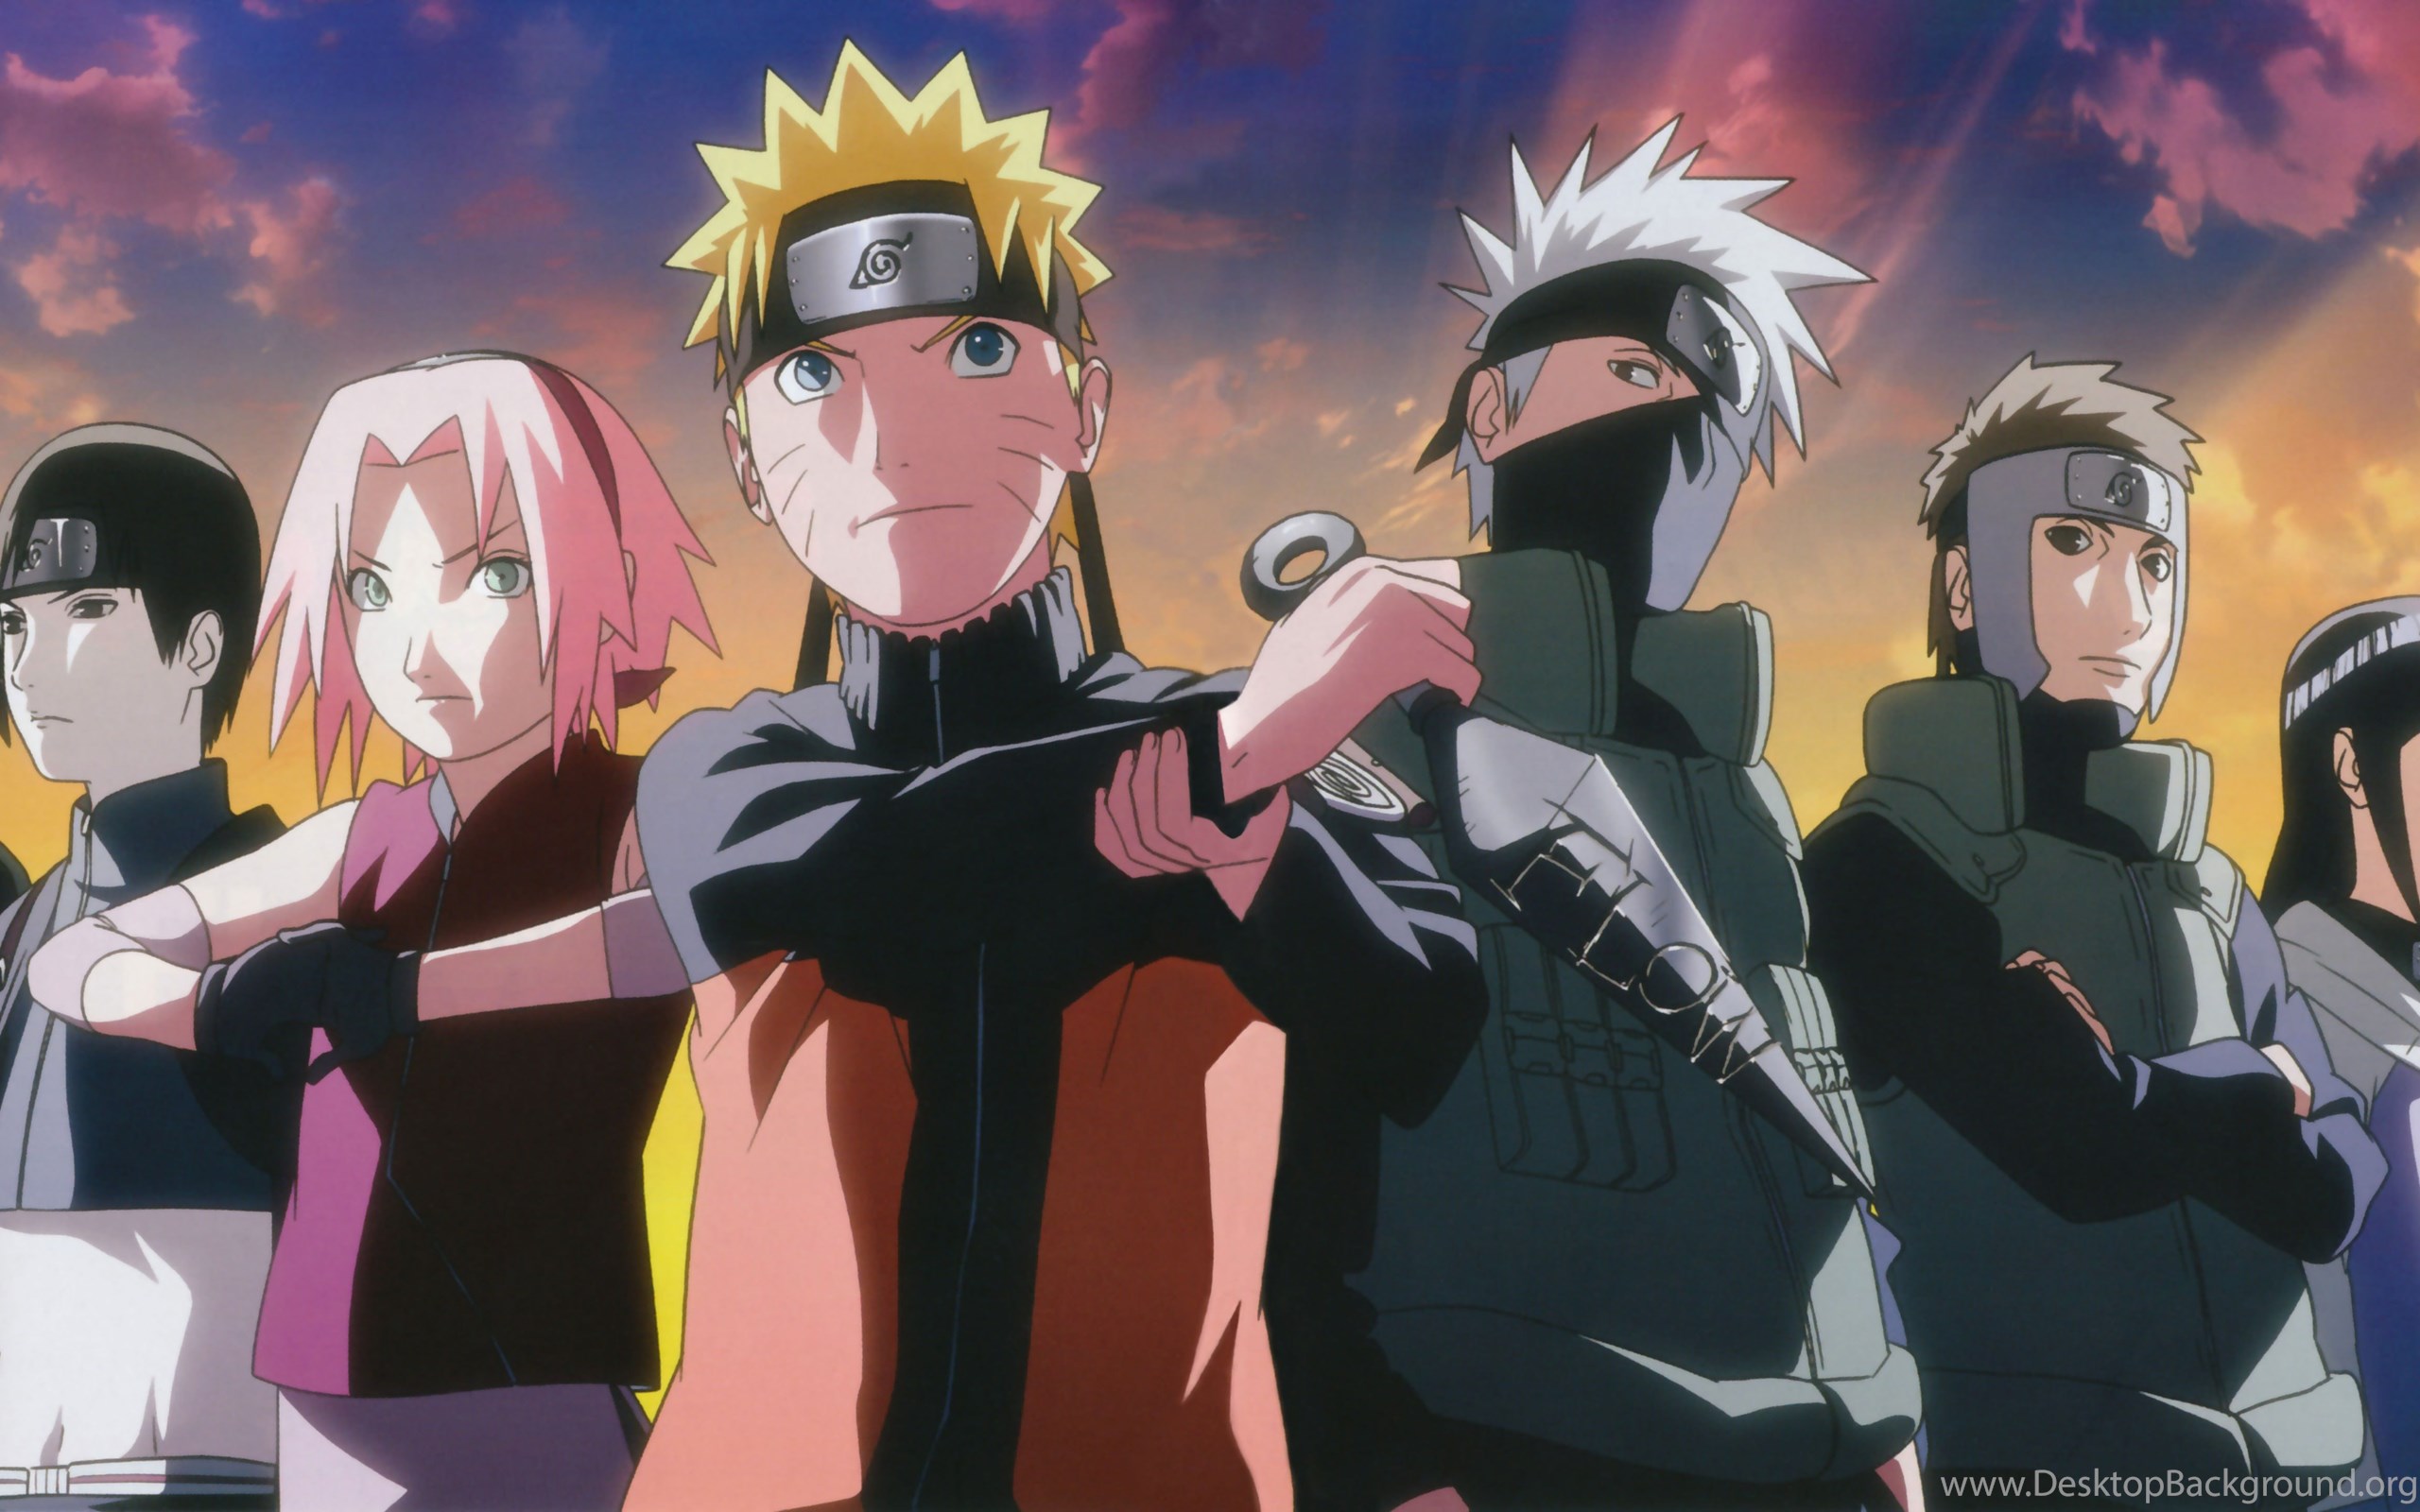 Download Naruto Shippuden All Characters Wallpapers Wallpapers Zone Widescr...